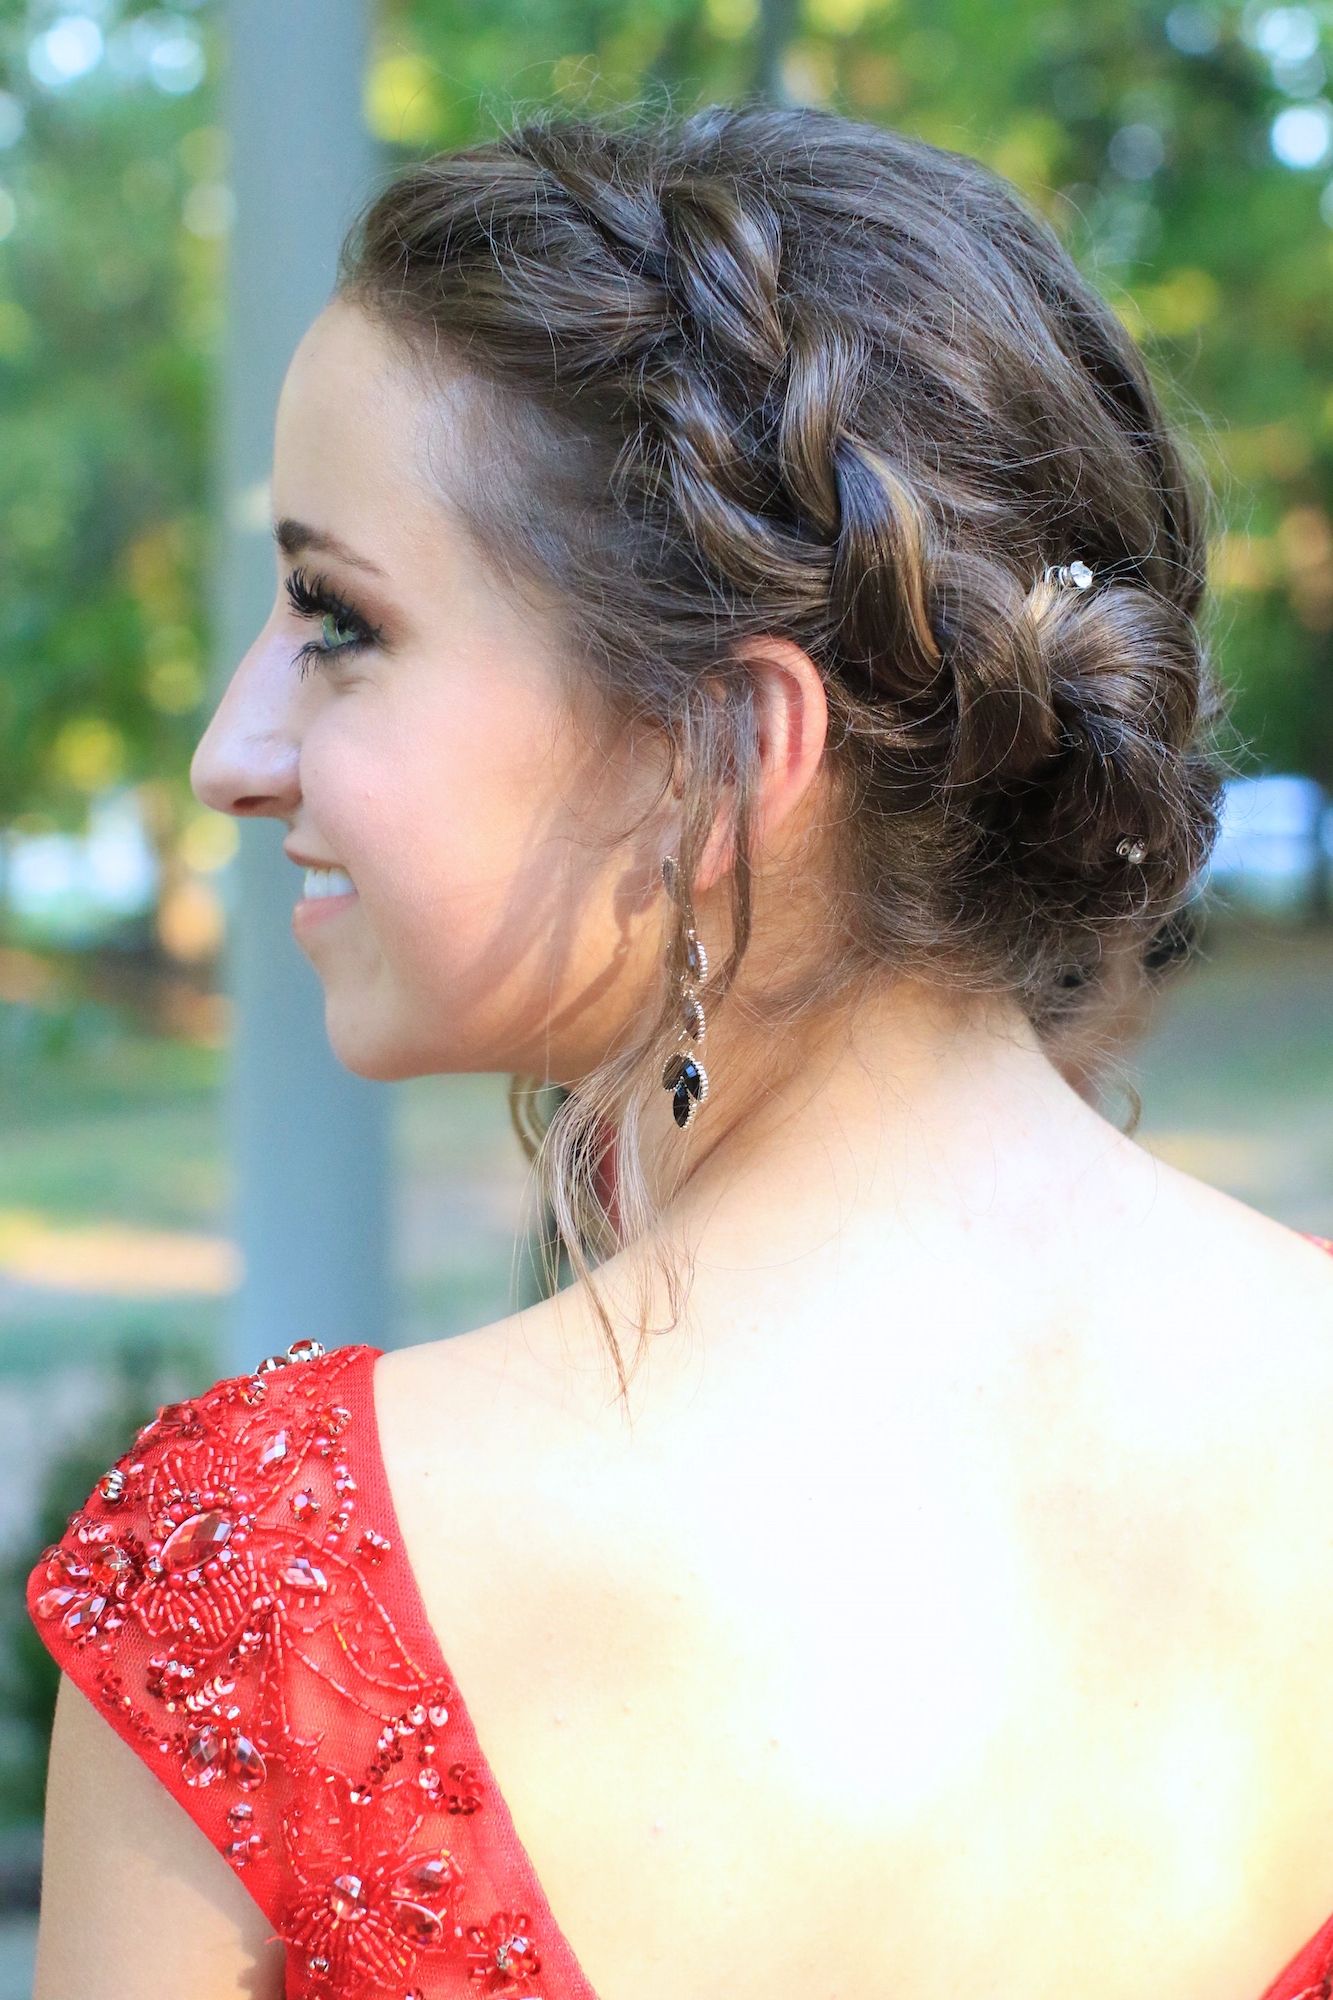 Rope Twist Updo | Homecoming Hairstyles | Cute Girls Hairstyles Intended For Cute Hairstyles For Short Hair For Homecoming (View 17 of 25)